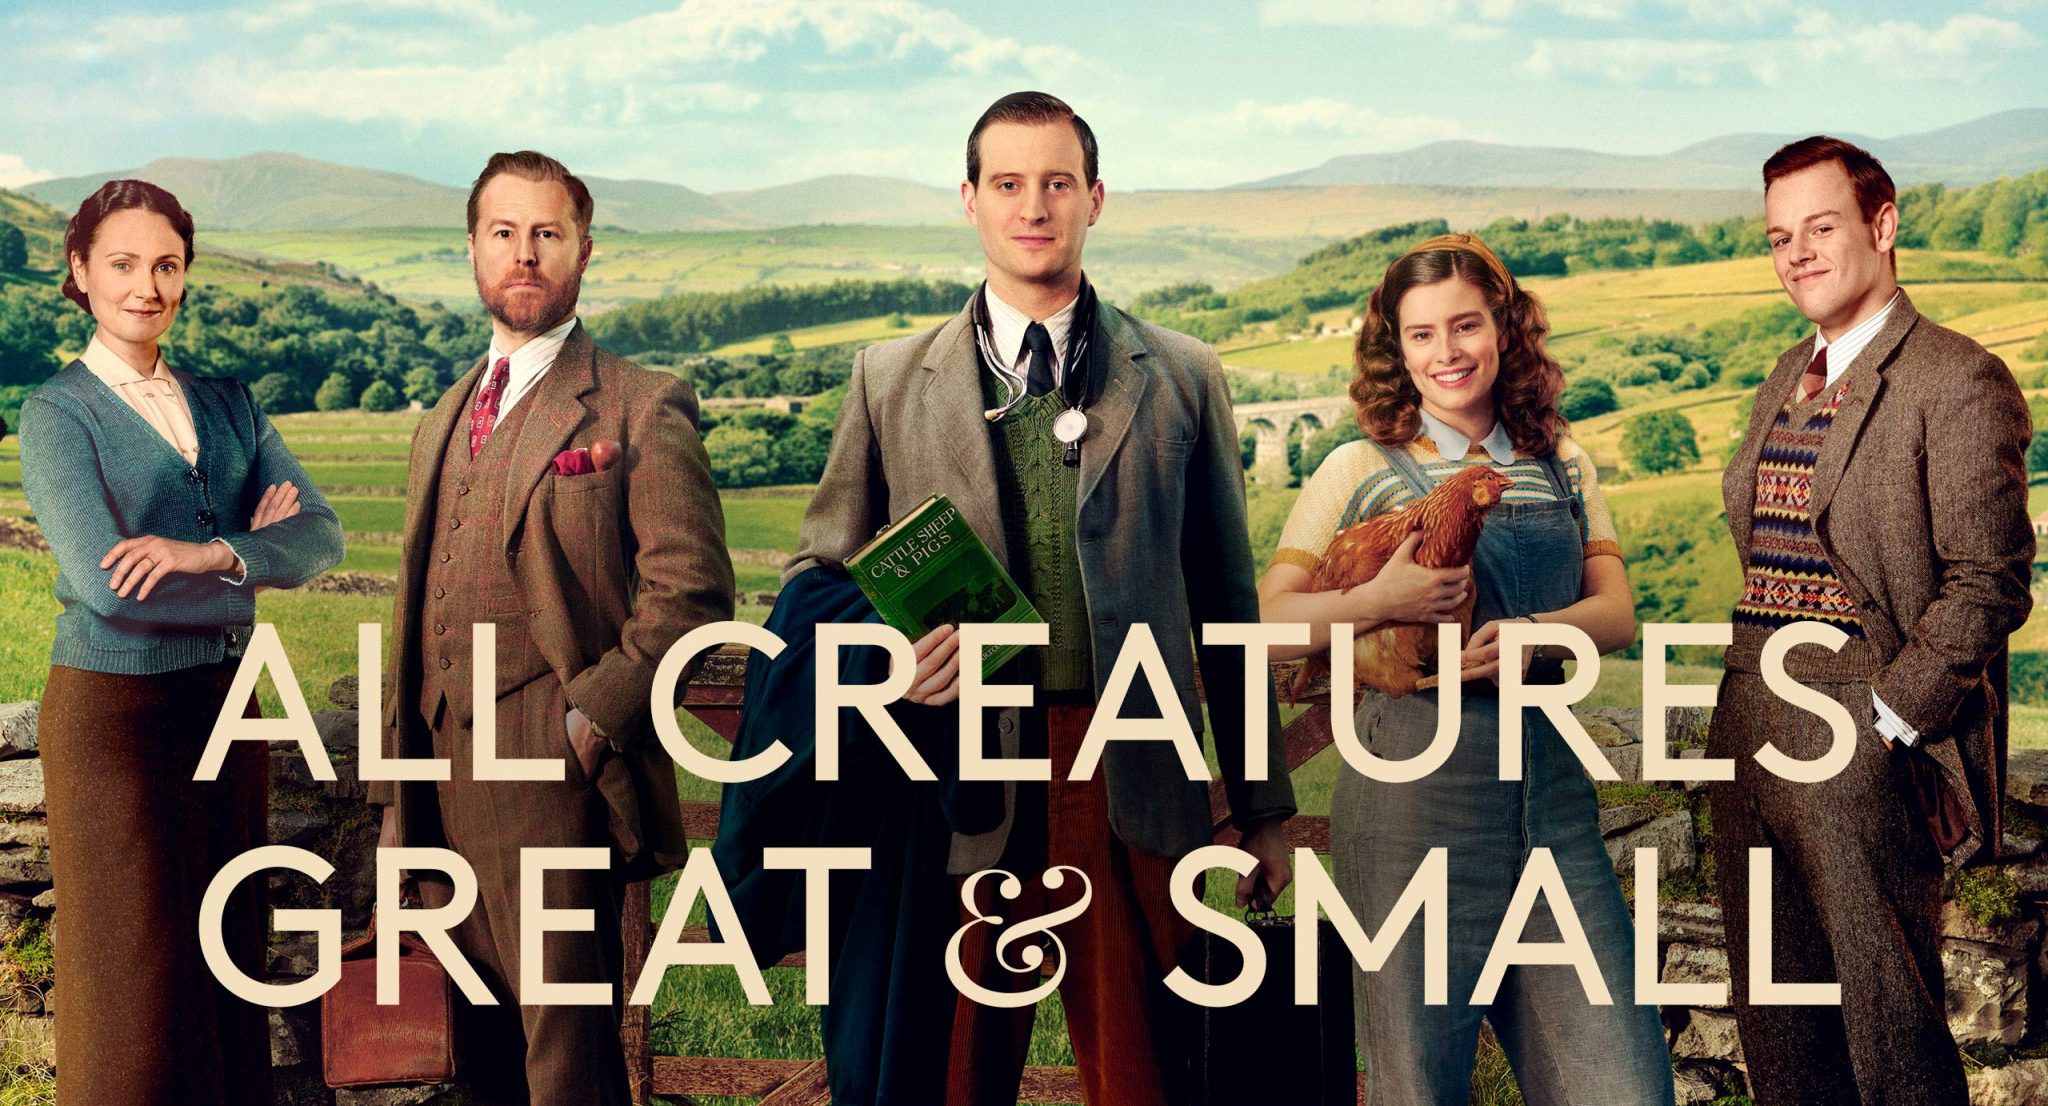 All Creatures Great and Small Season 2: Release Date and Preview - All Creatures Great And Small 2020 Season 2 Release Date